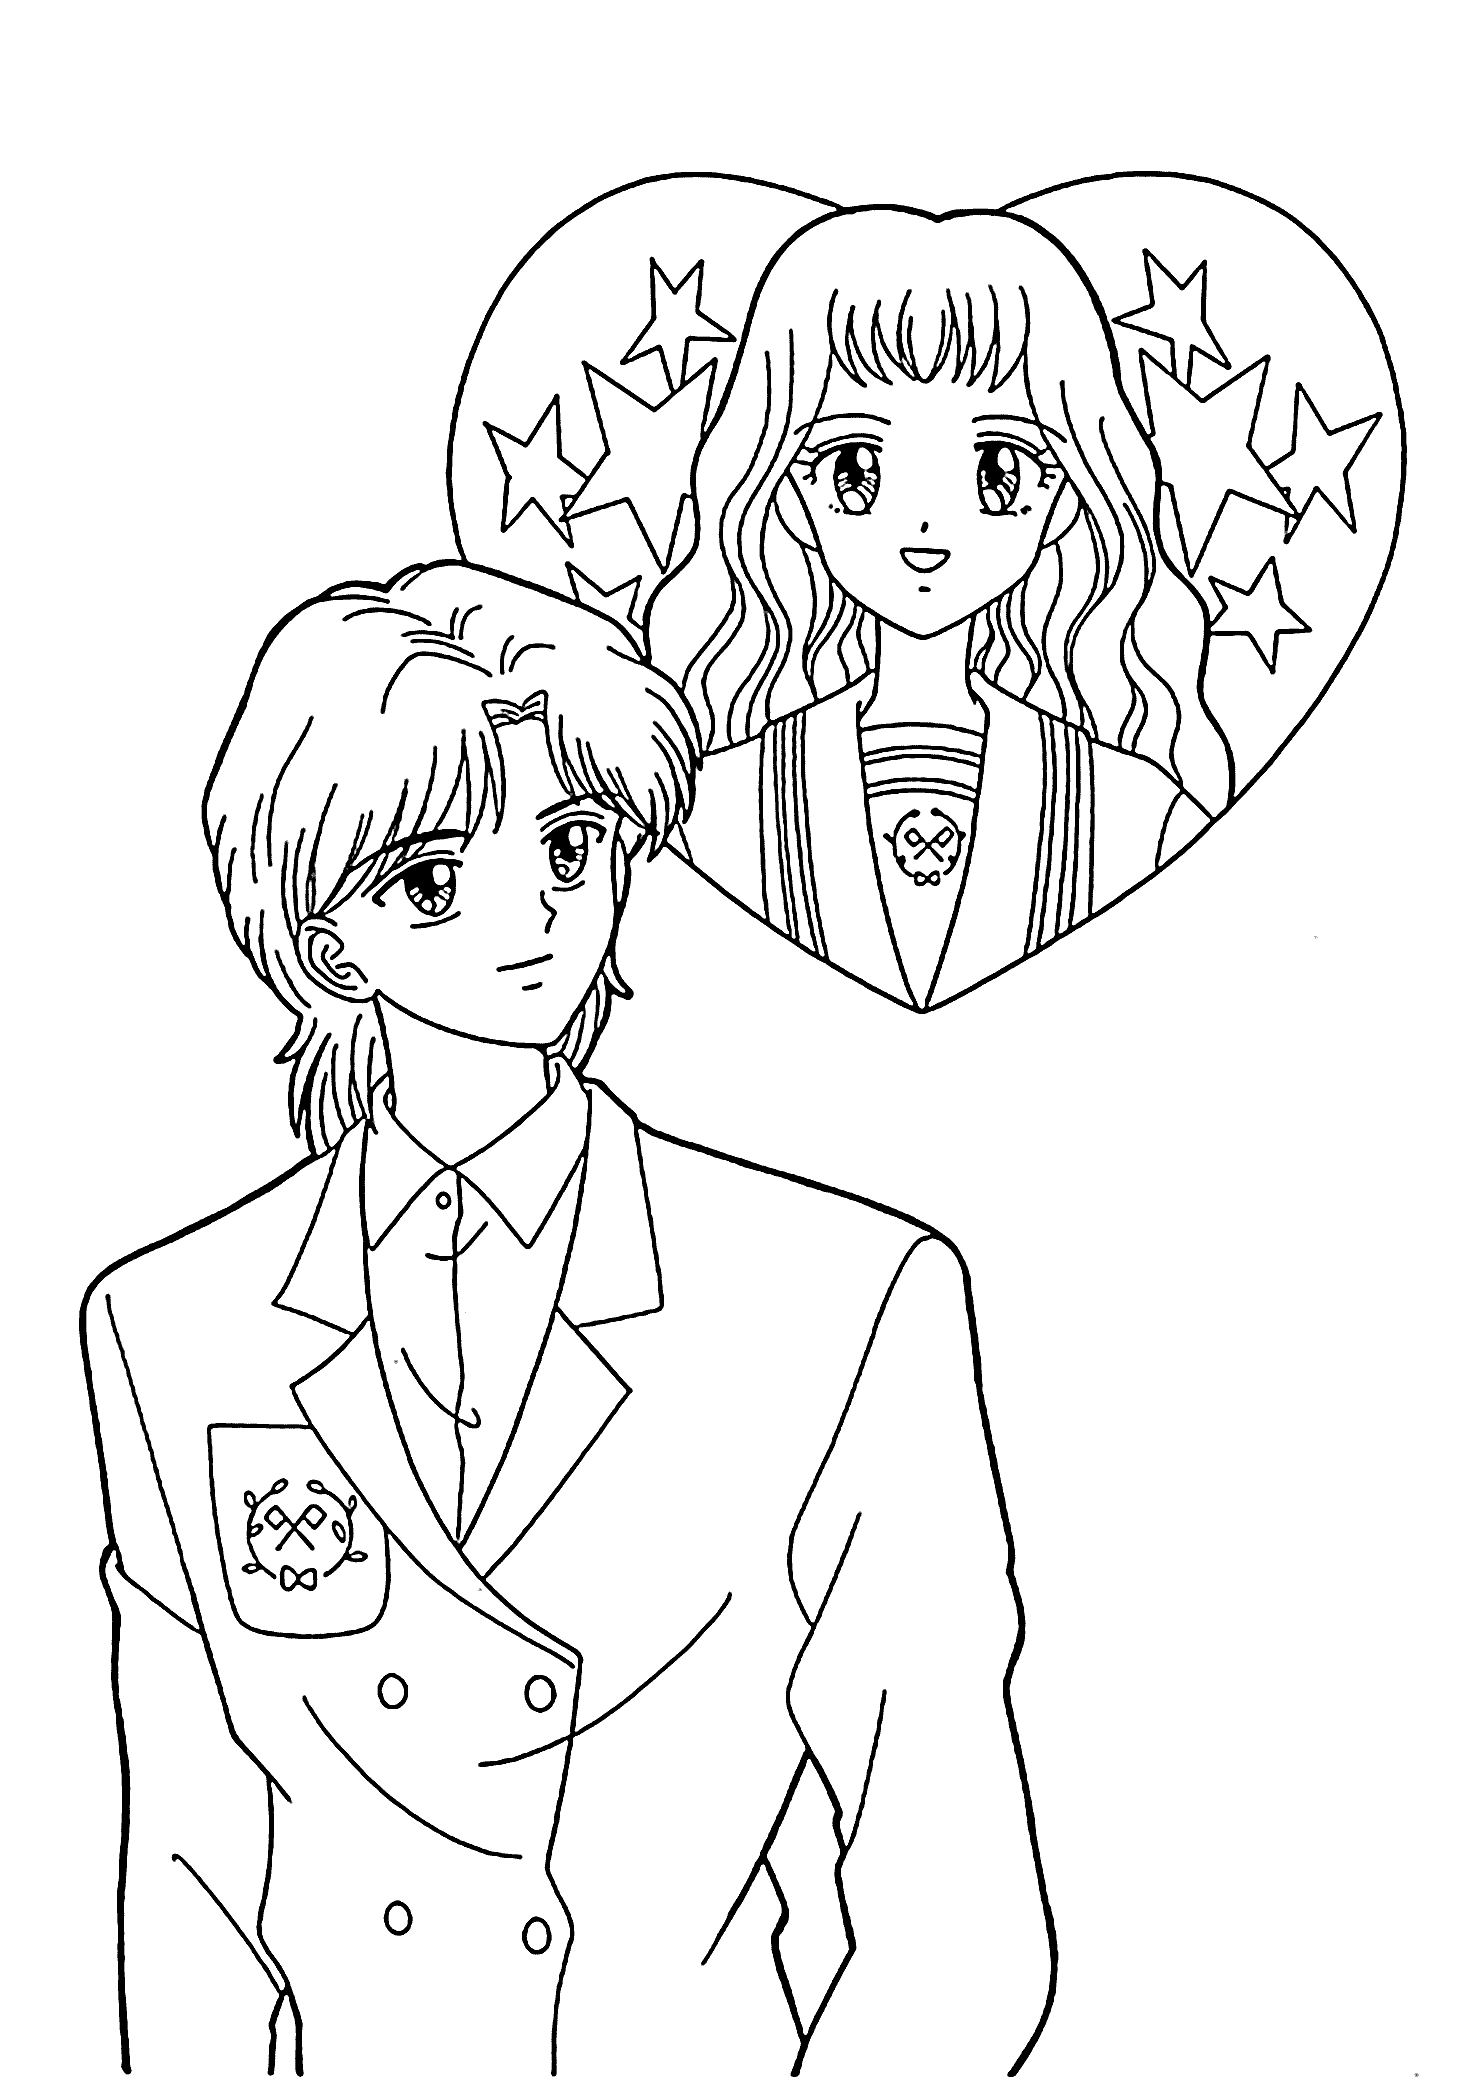 Coloring Pages For Girls Marmalade Boy Coloring Pages Free Love ...